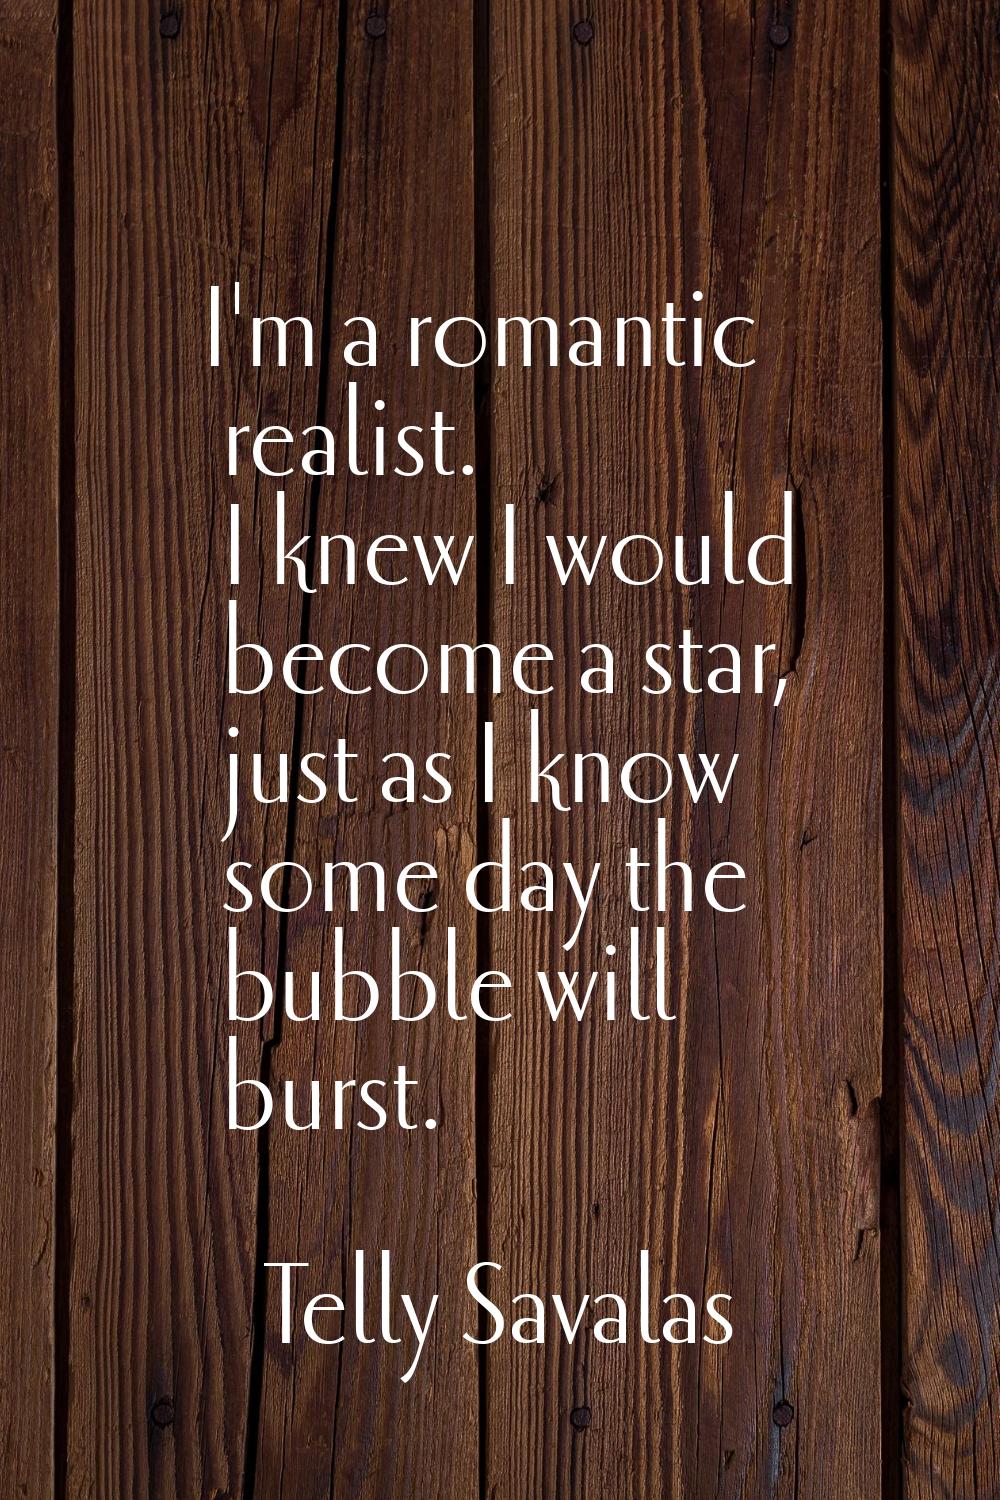 I'm a romantic realist. I knew I would become a star, just as I know some day the bubble will burst